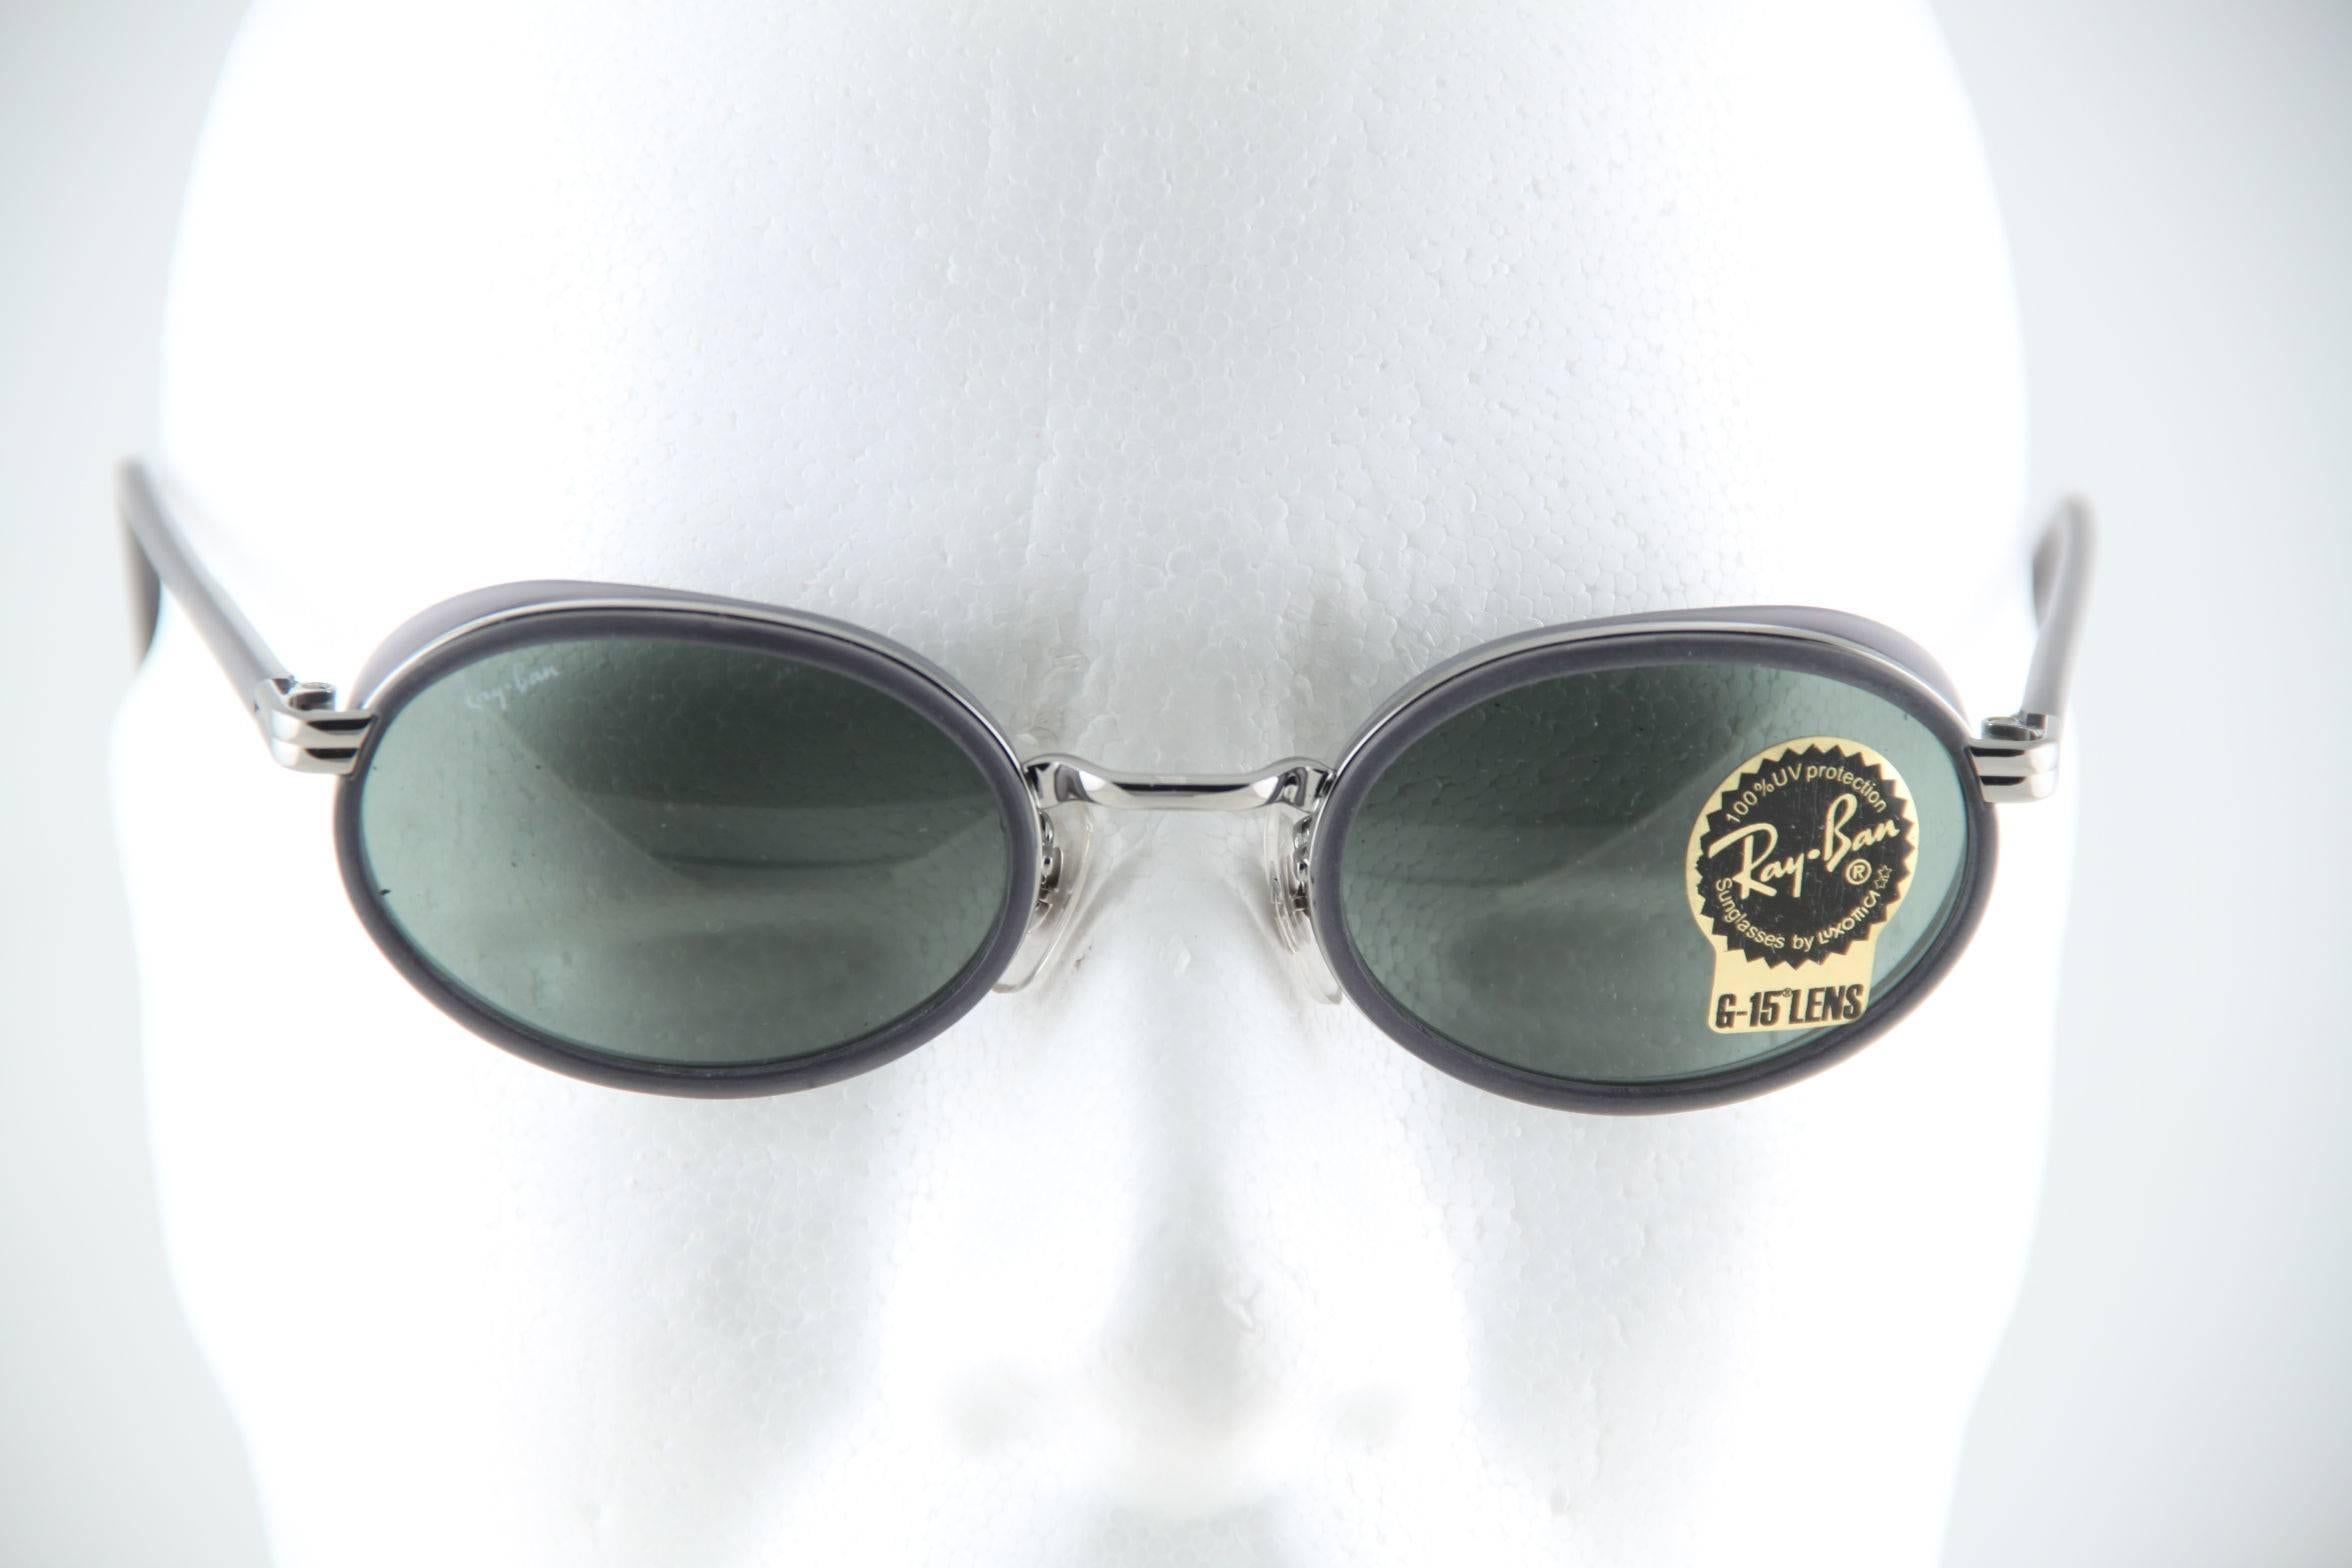 - Ray-Ban by Bausch & Lomb

- Mod. RB3037 - W2813 (1990s stock), Gray VINTAGE beautiful OVAL sunglasses, with Ray-Ban Bausch & Lomb original G15 lens.

 Condition: MINT SUNGLASSES. They will come with an unbranded case & cleaning